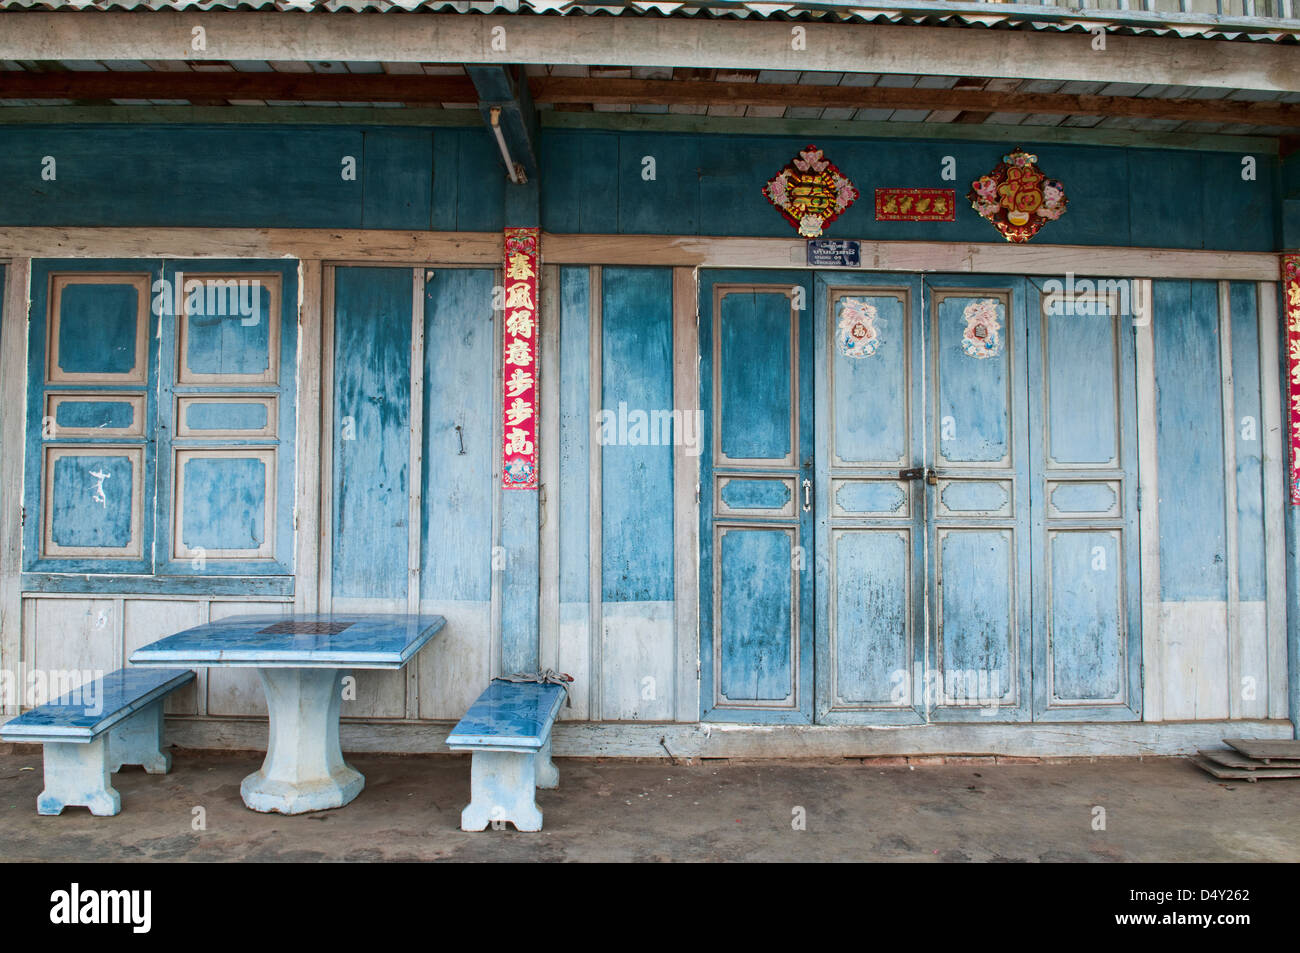 traditional architecture in Phongsaly, Laos Stock Photo